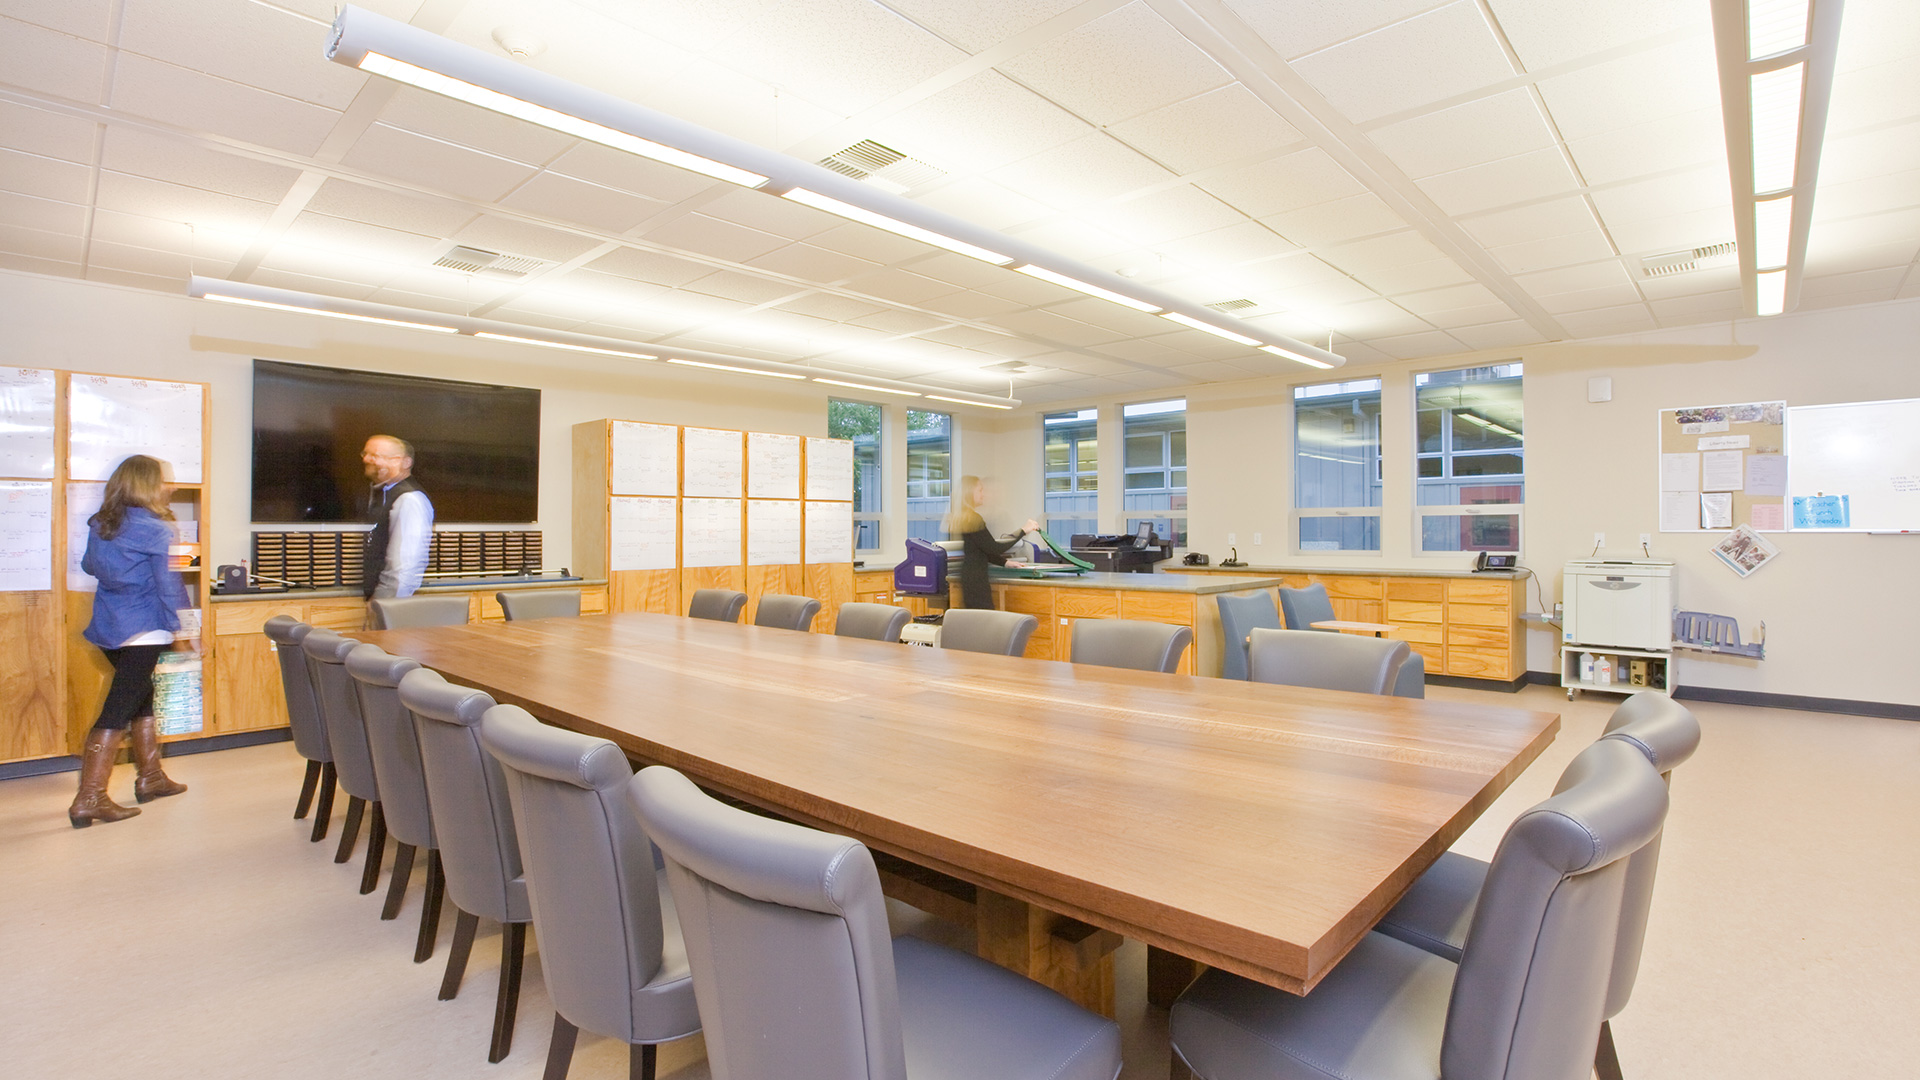 New staff conference room interior, with large wooden table and working area behind.